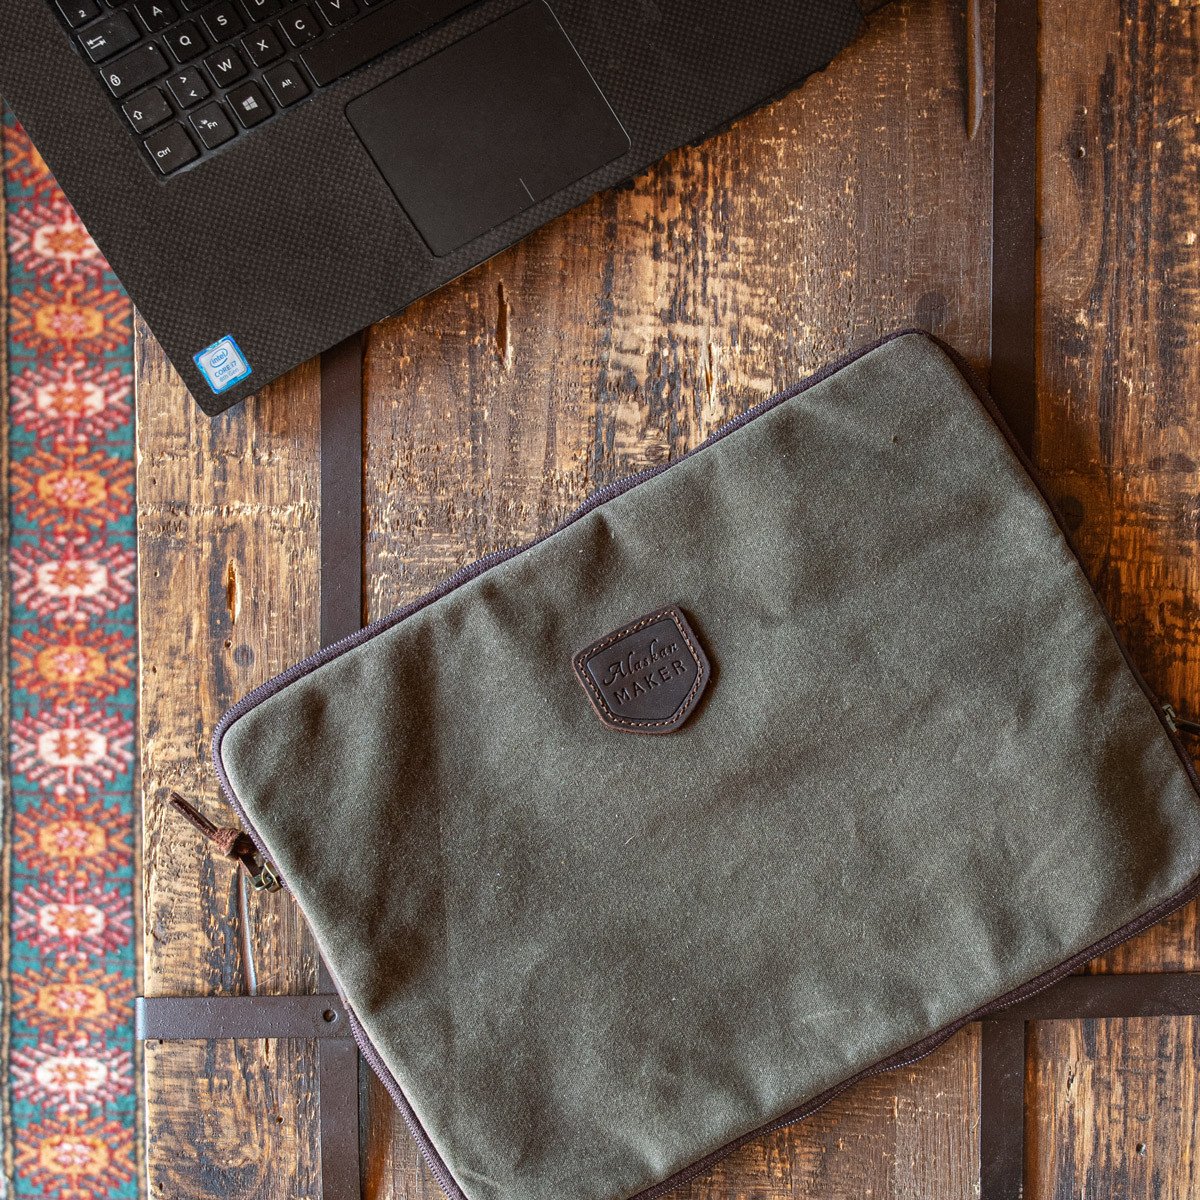 Waxed Canvas Laptop sleeve in khaki on desk with lap top 